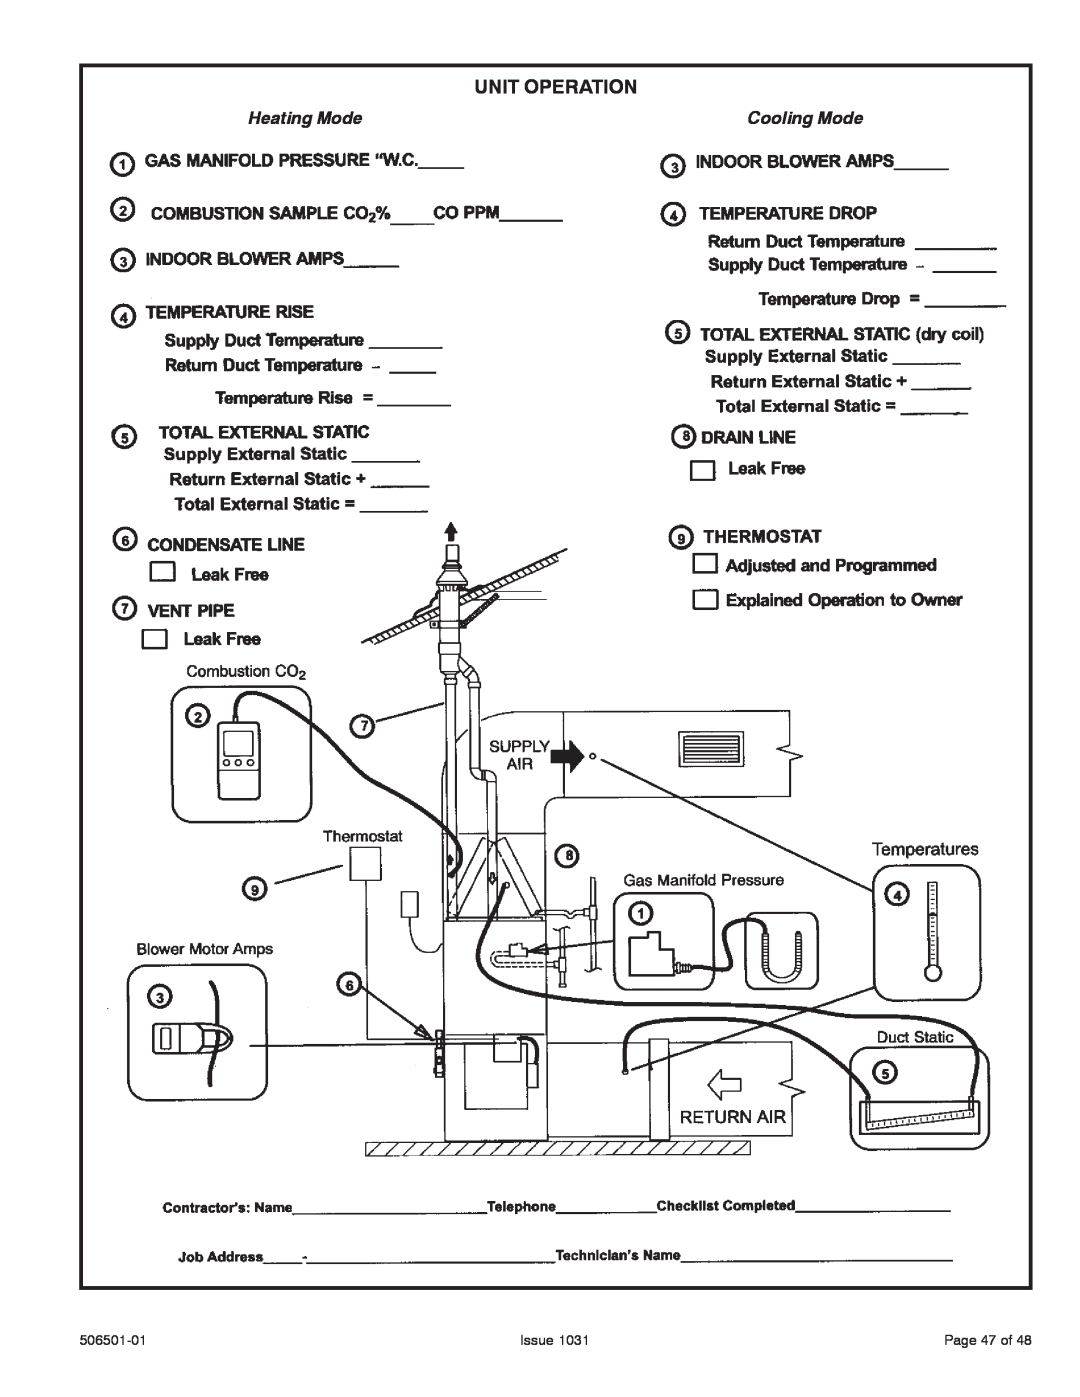 Allied Air Enterprises 92G1UH, A95UH, 95G1UH, A93UH Heating Mode, Cooling Mode, Unit Operation, Issue, Page 47 of, 506501-01 